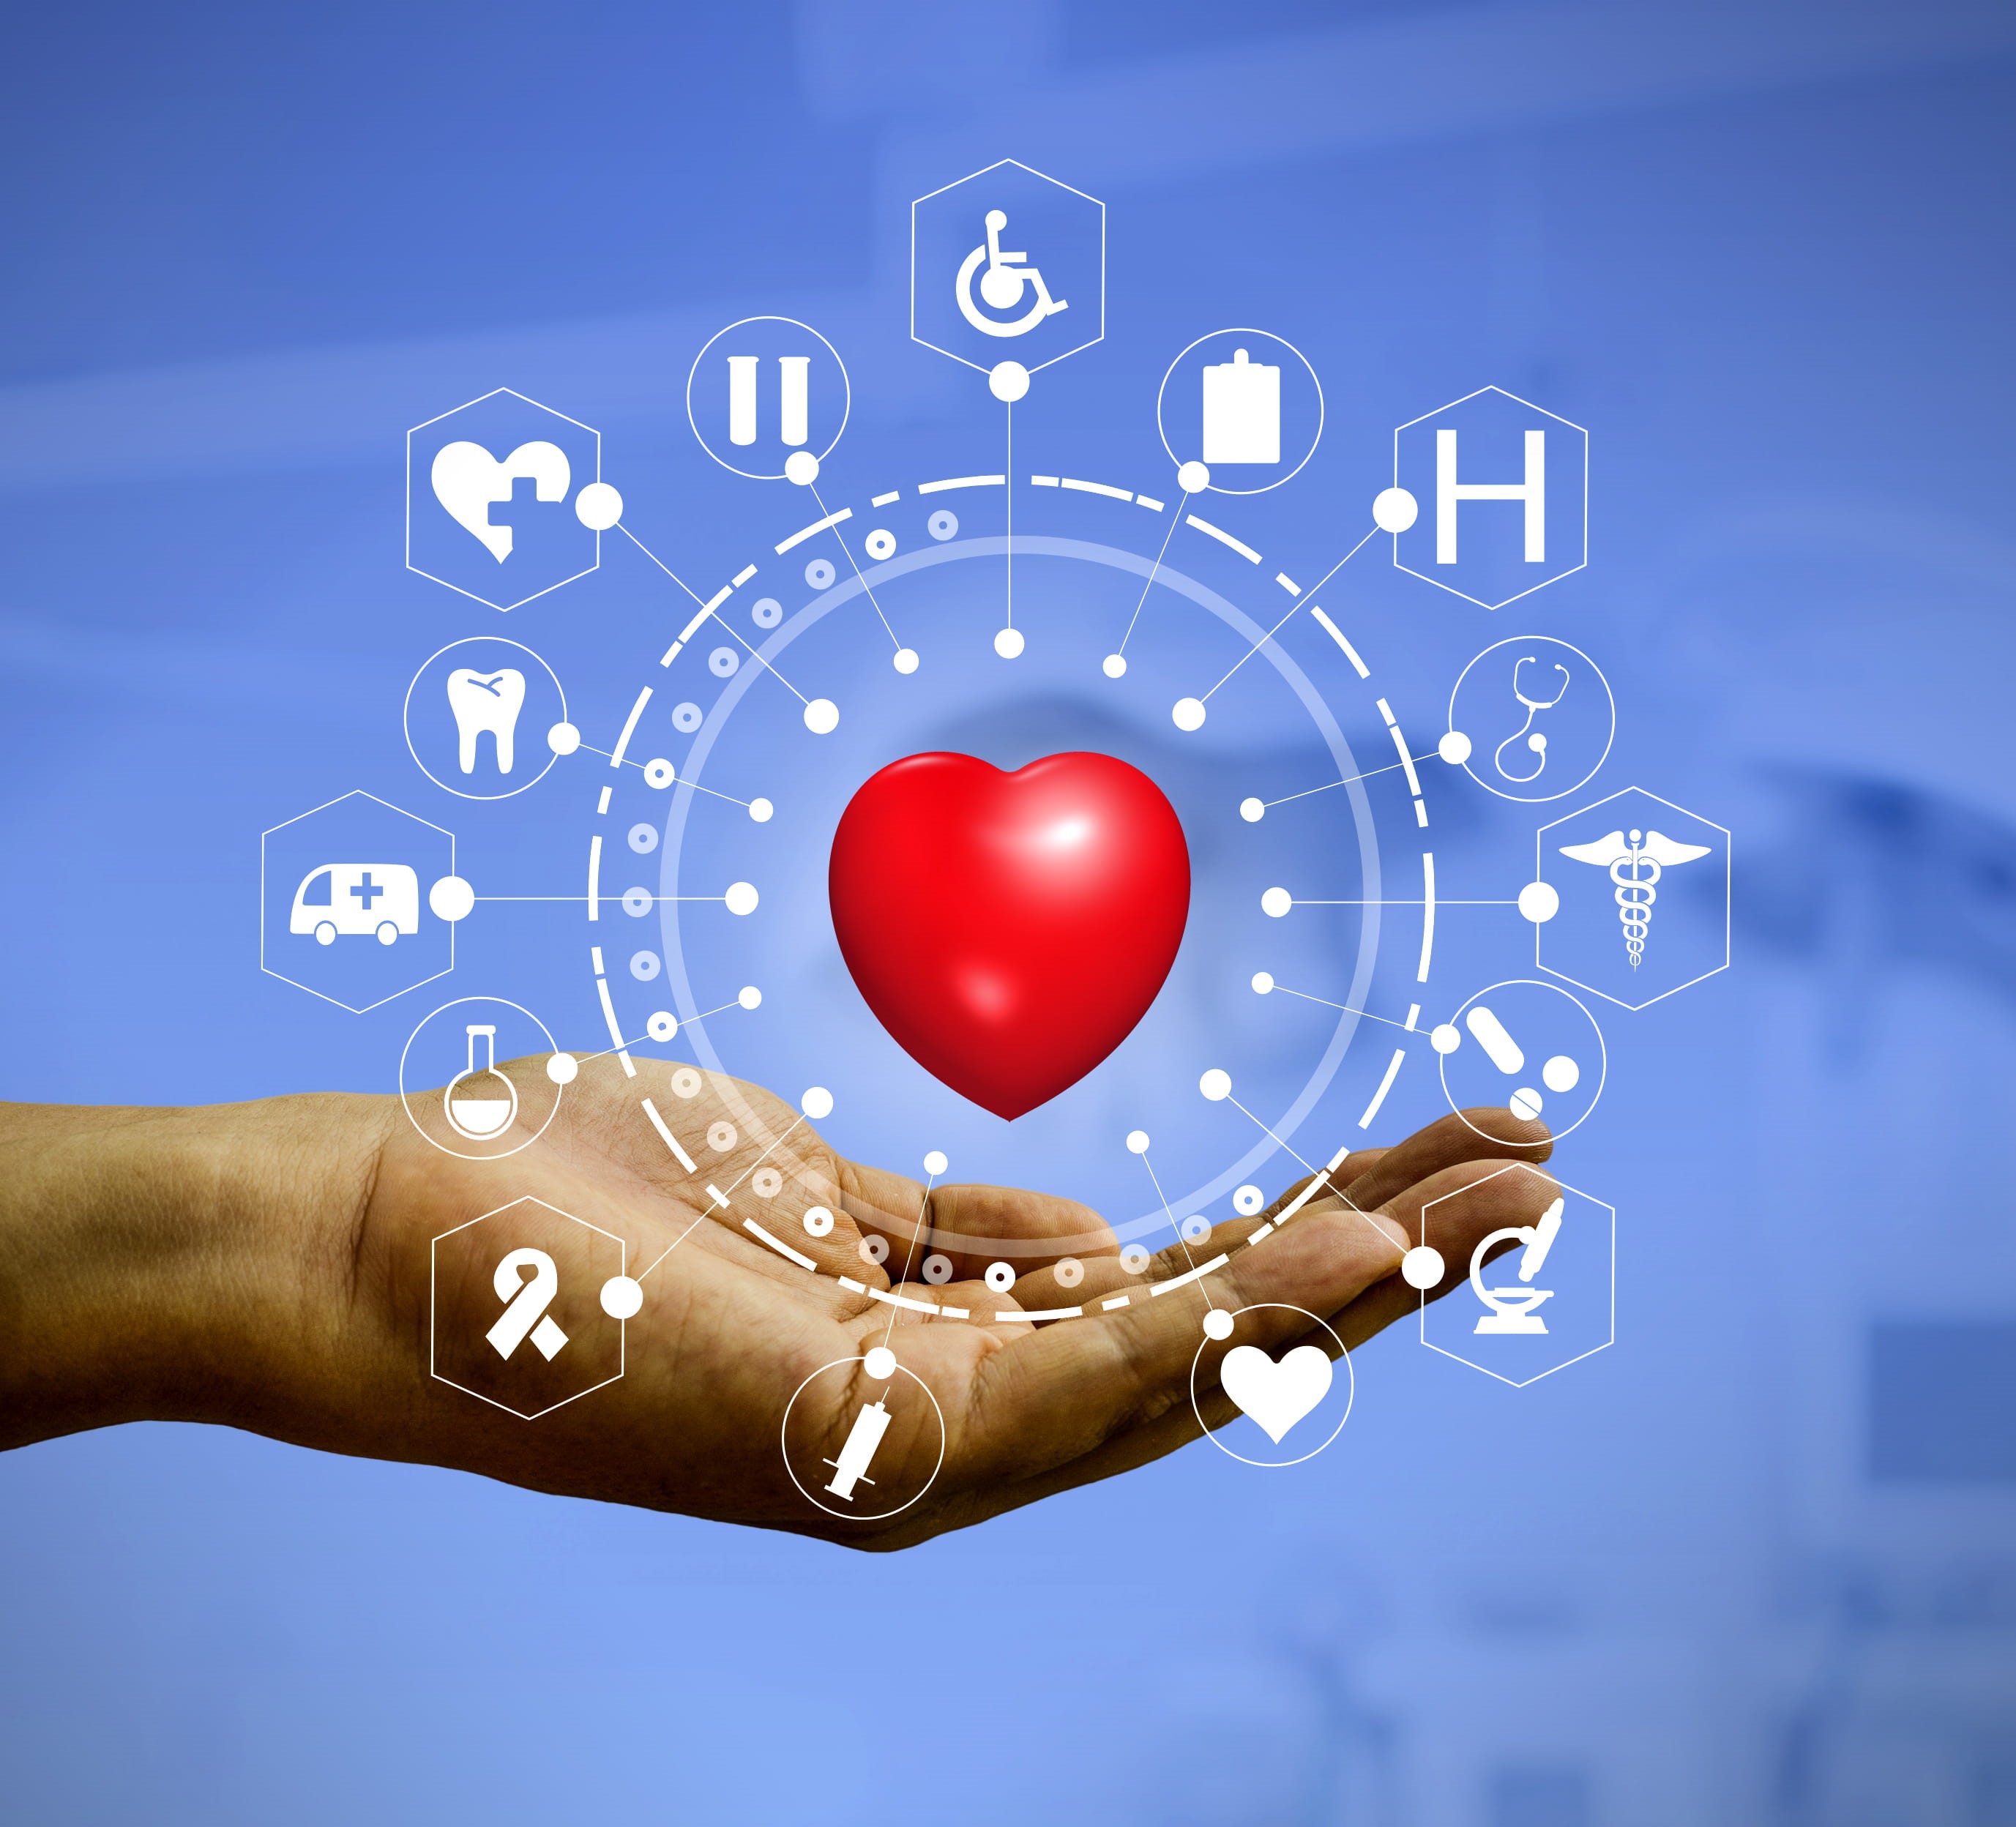 Wallpaper / virtual, costs, symbol, cardiology, technology, wireless technology, hand, social networking, medication, care, text, hospital, sign, global communications free download